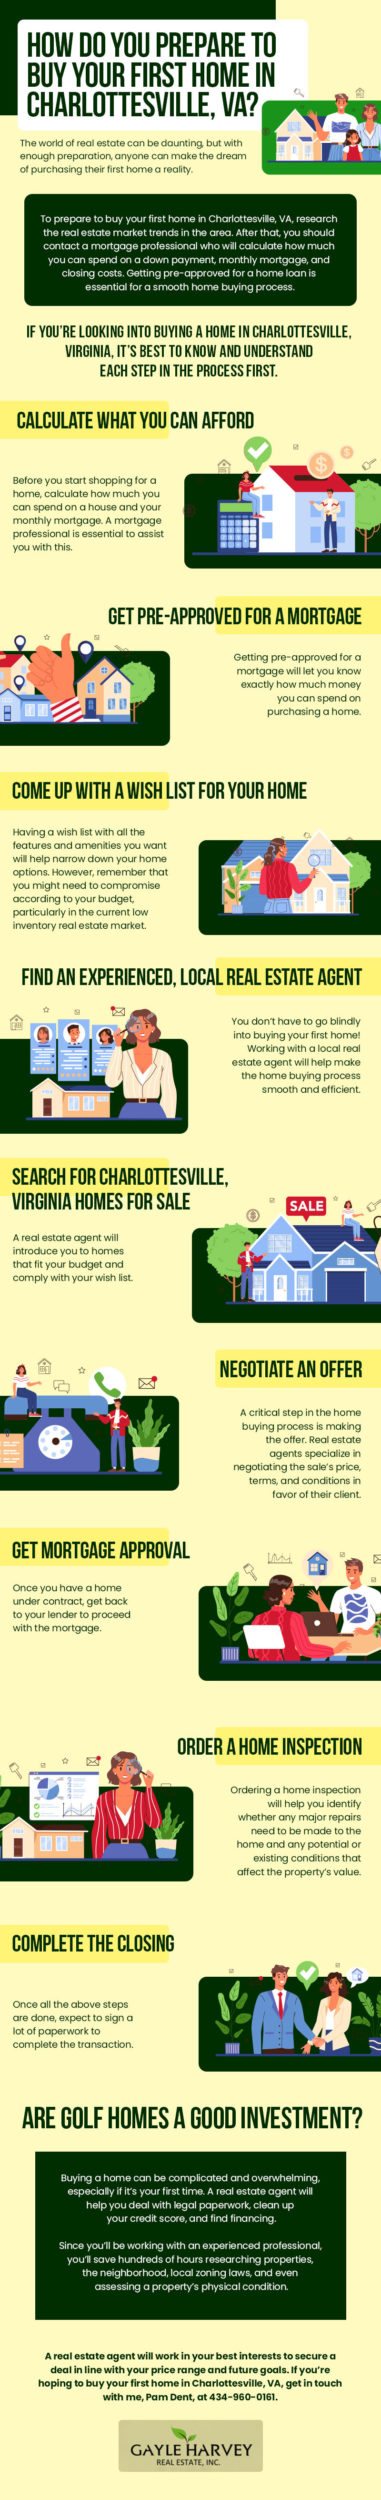 Buying a Charlottesville, VA Home 